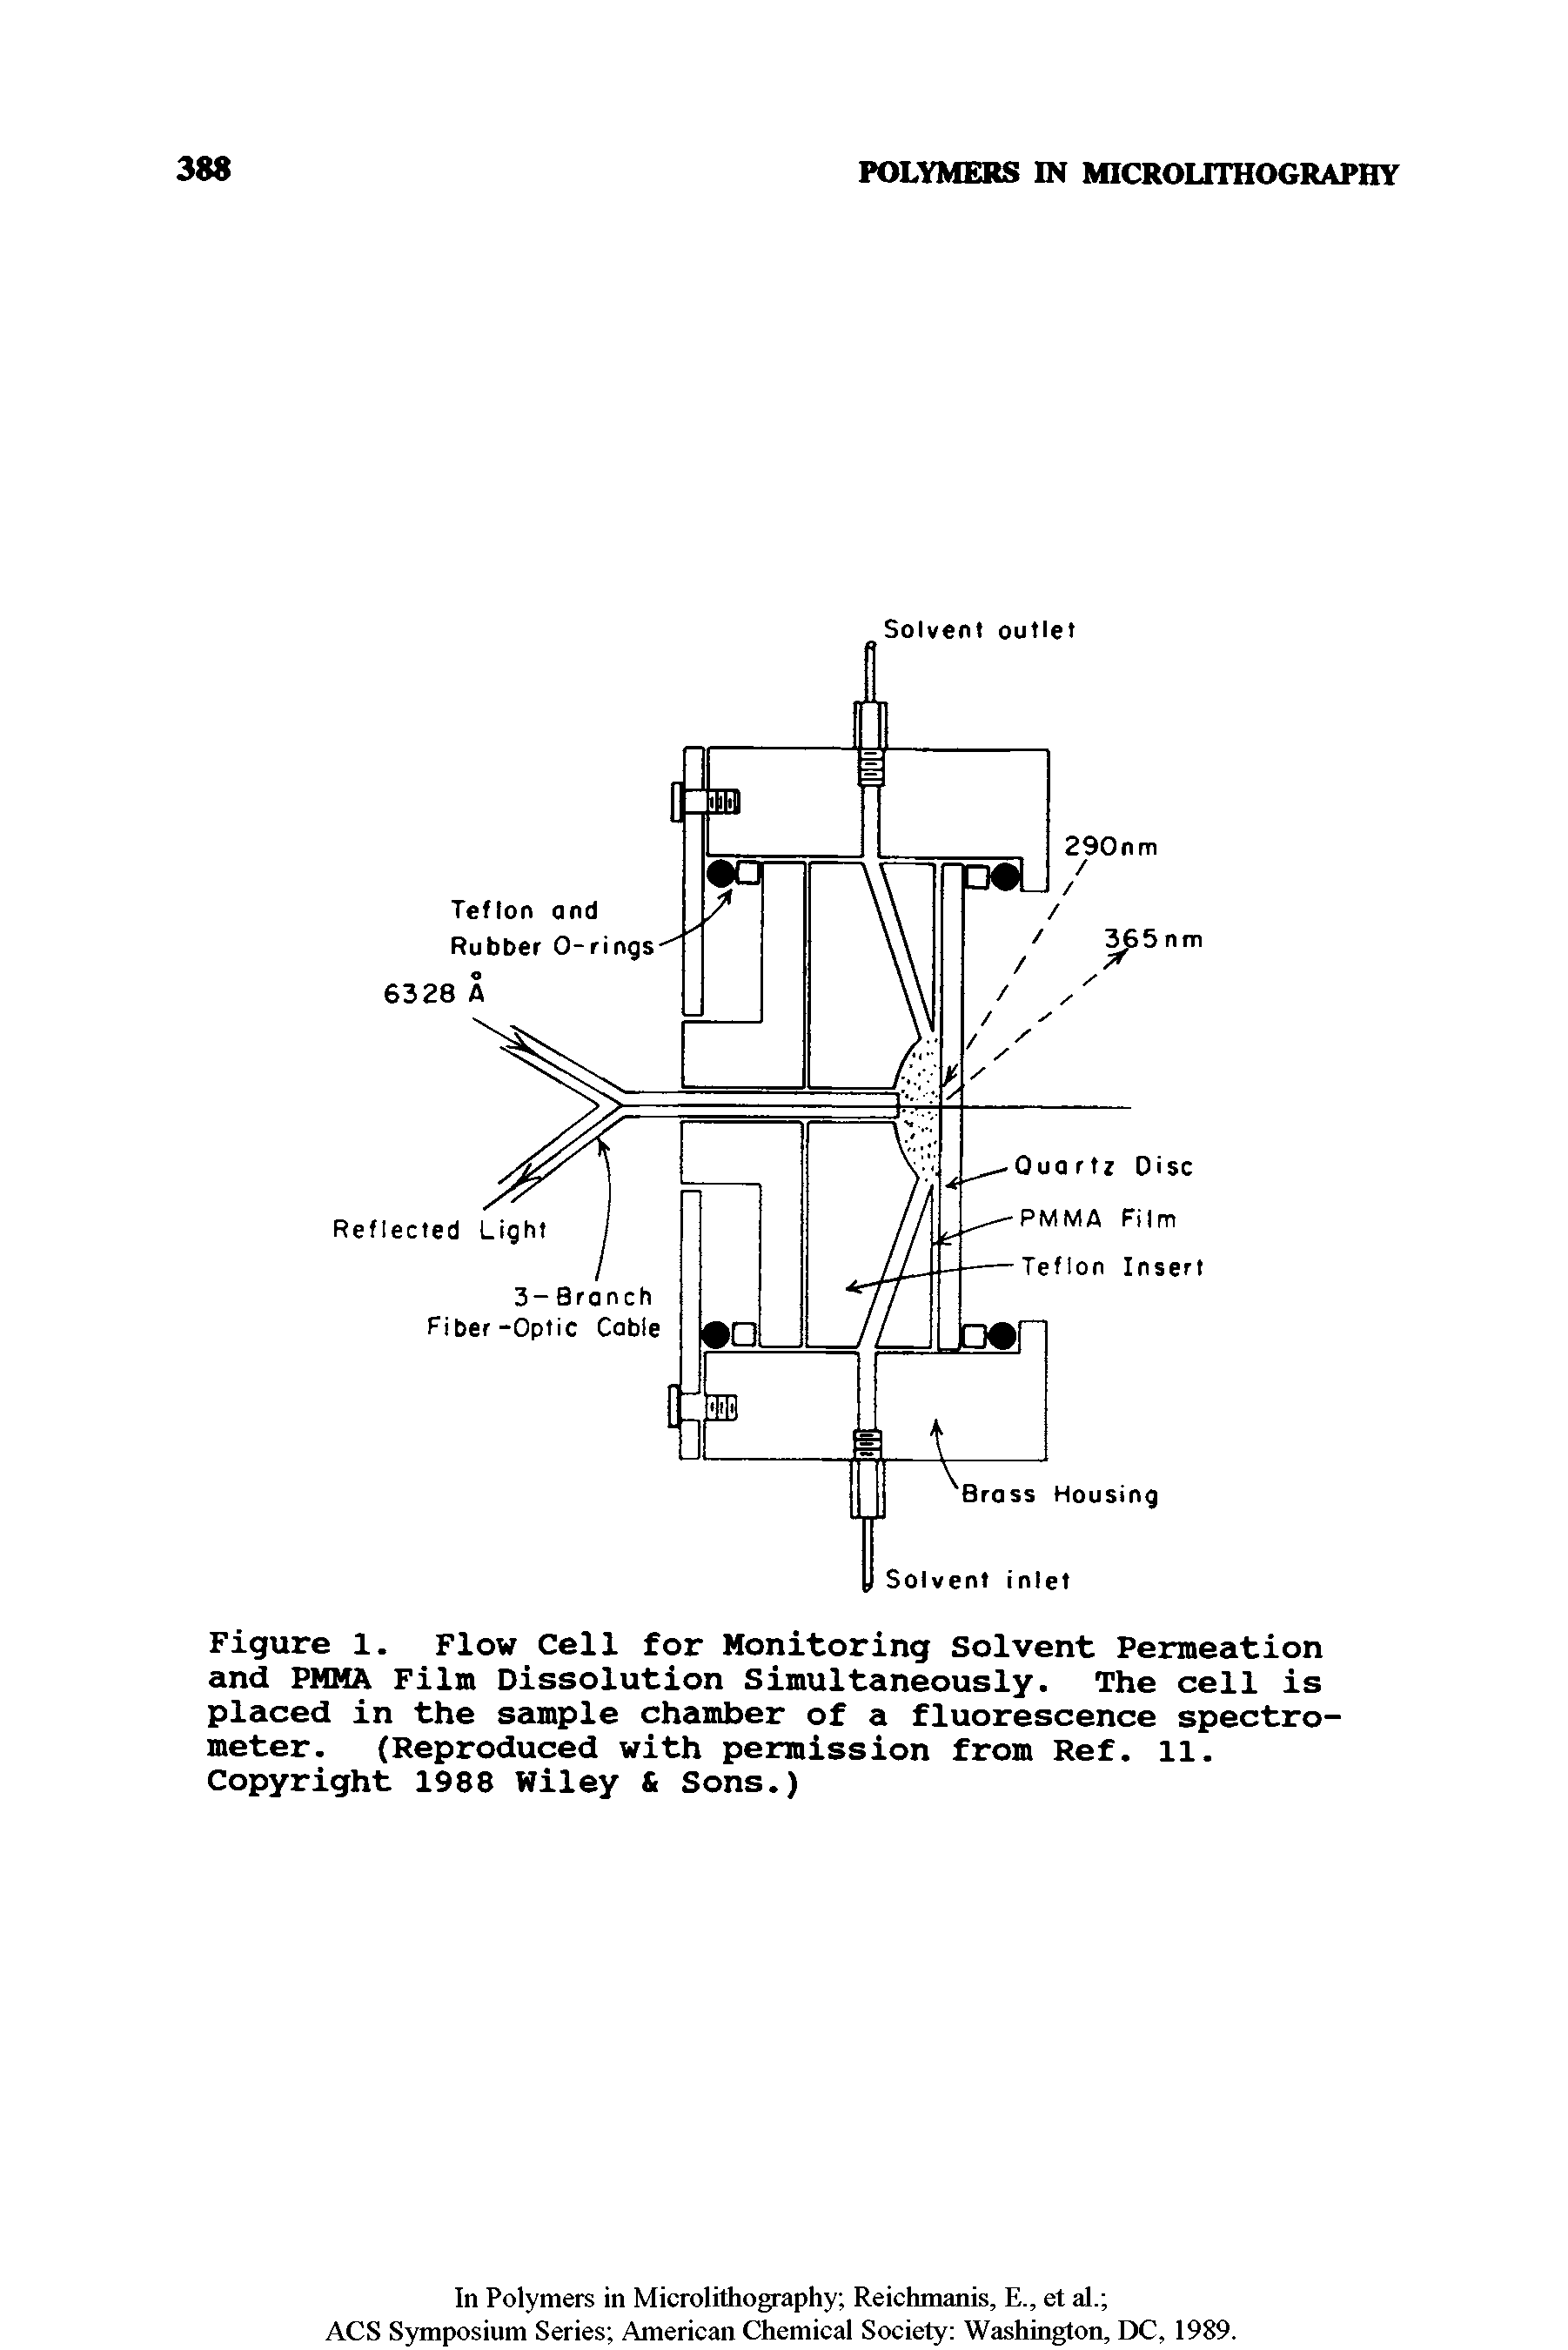 Figure 1. Flow Cell for Monitoring solvent Permeation and PMMA Film Dissolution Simultaneously. The cell is placed in the sample chamber of a fluorescence spectrometer. (Reproduced with permission from Ref. ll. Copyright 1988 Wiley Sons.)...